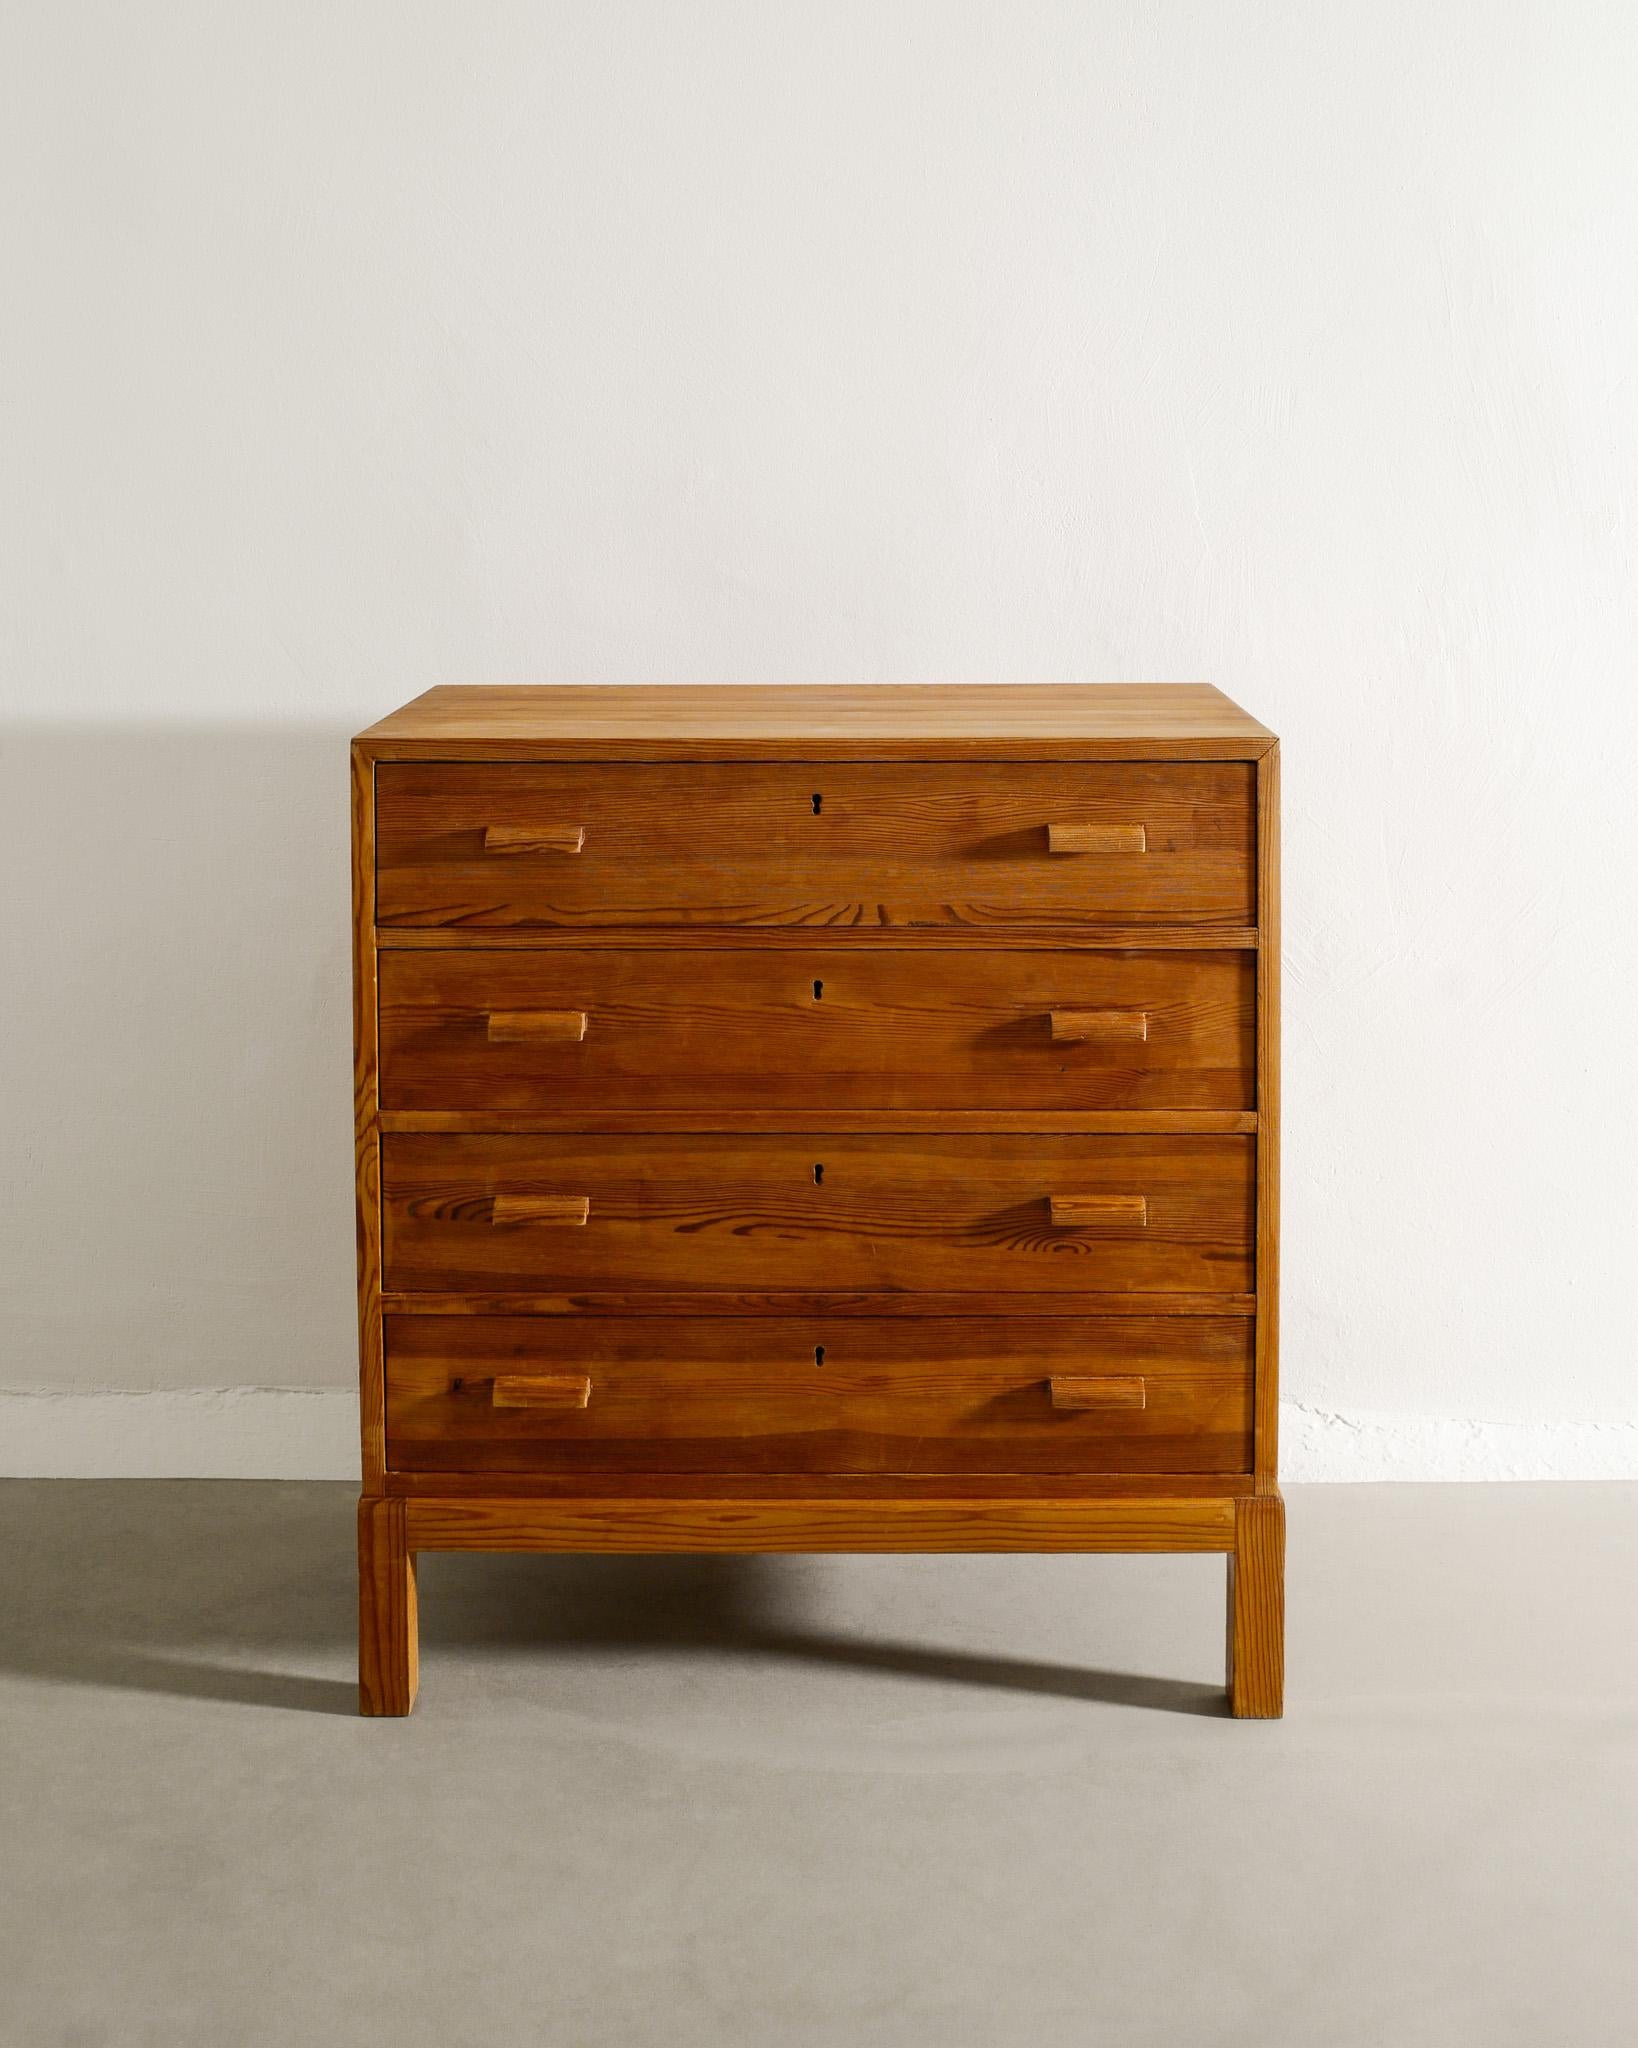 Scandinavian Modern Swedish Chest of Drawers in Pine in style of Axel Einar Hjorth Produced, 1930s 